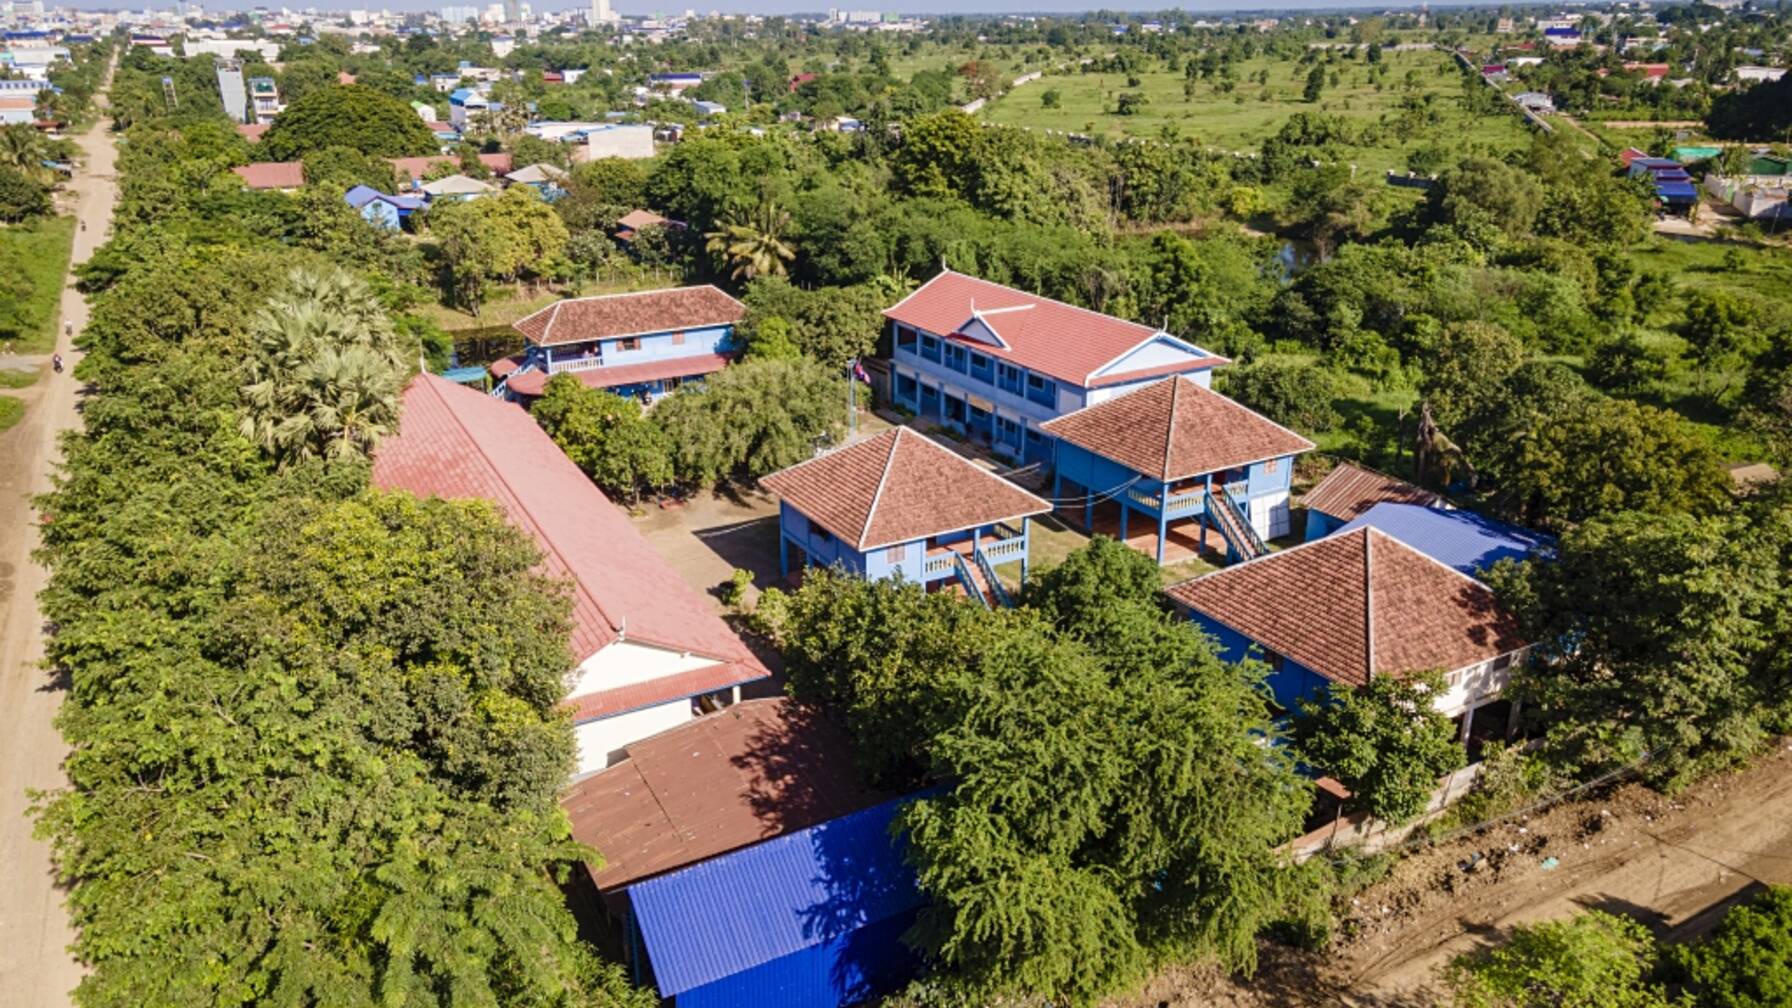 An inviting school campus surrounded by many trees. 